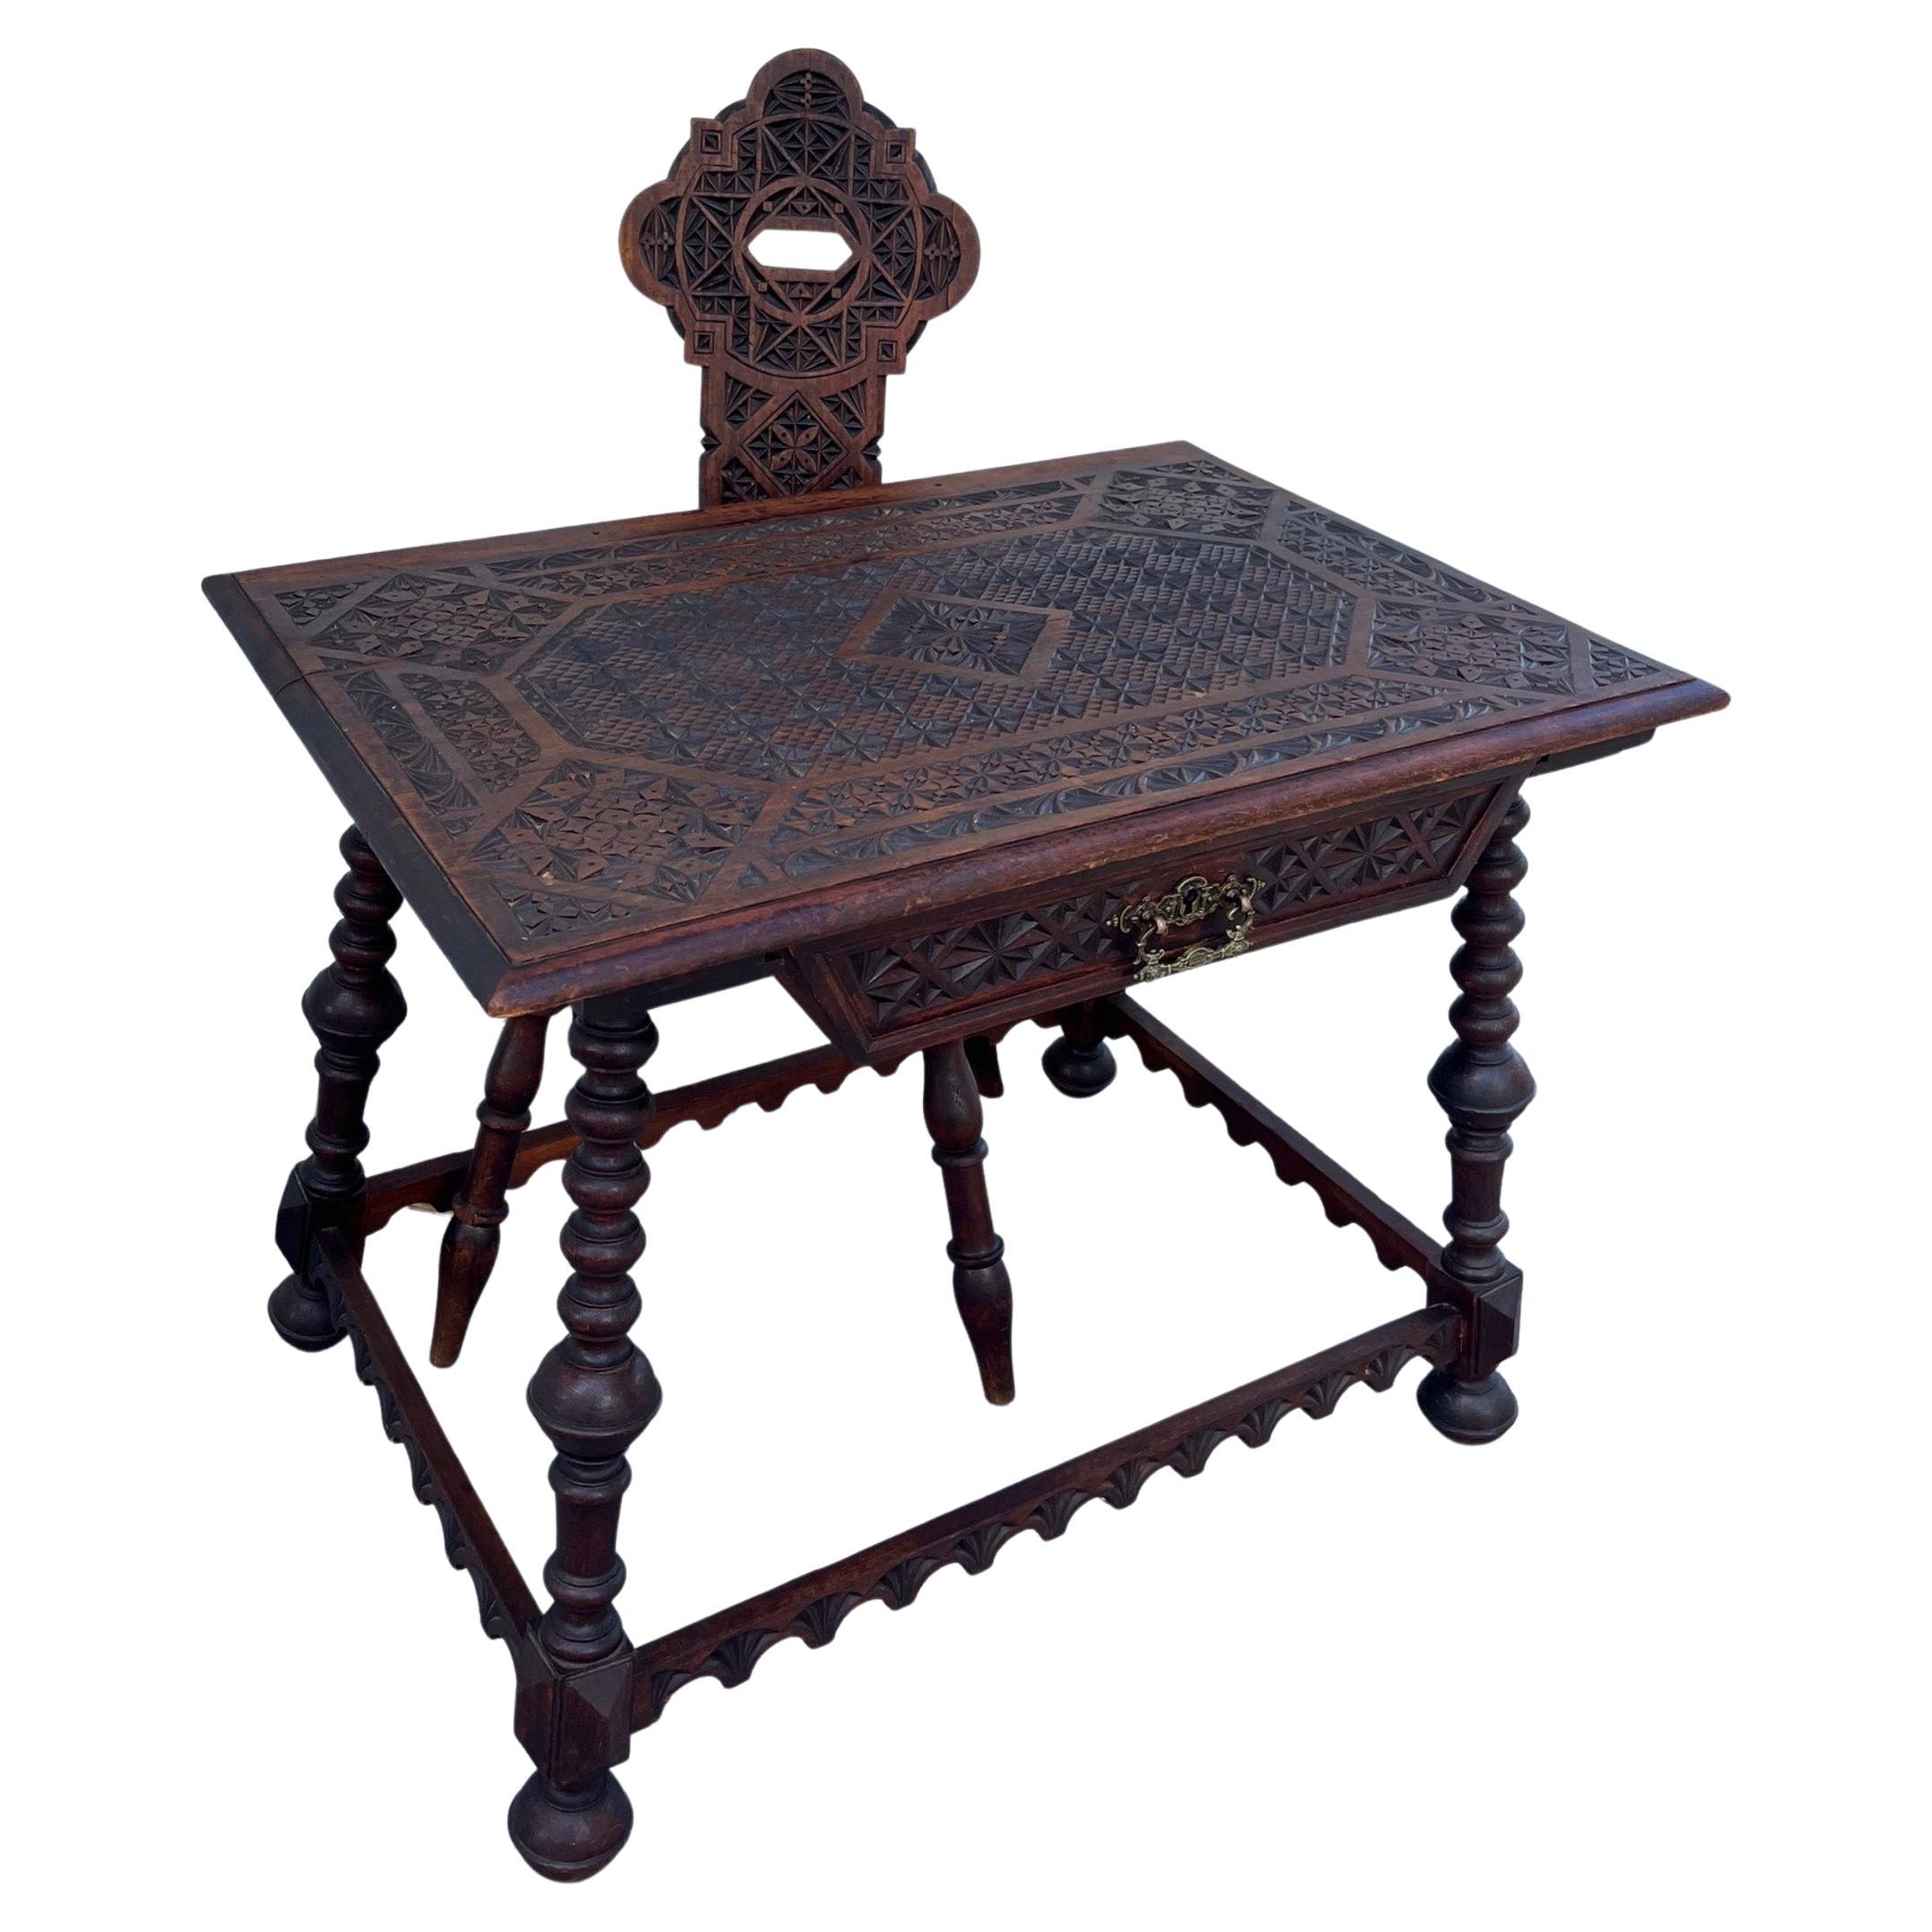 19th Century German Black Forest Chip-Carved Suite Desk with Drawer and Chair For Sale